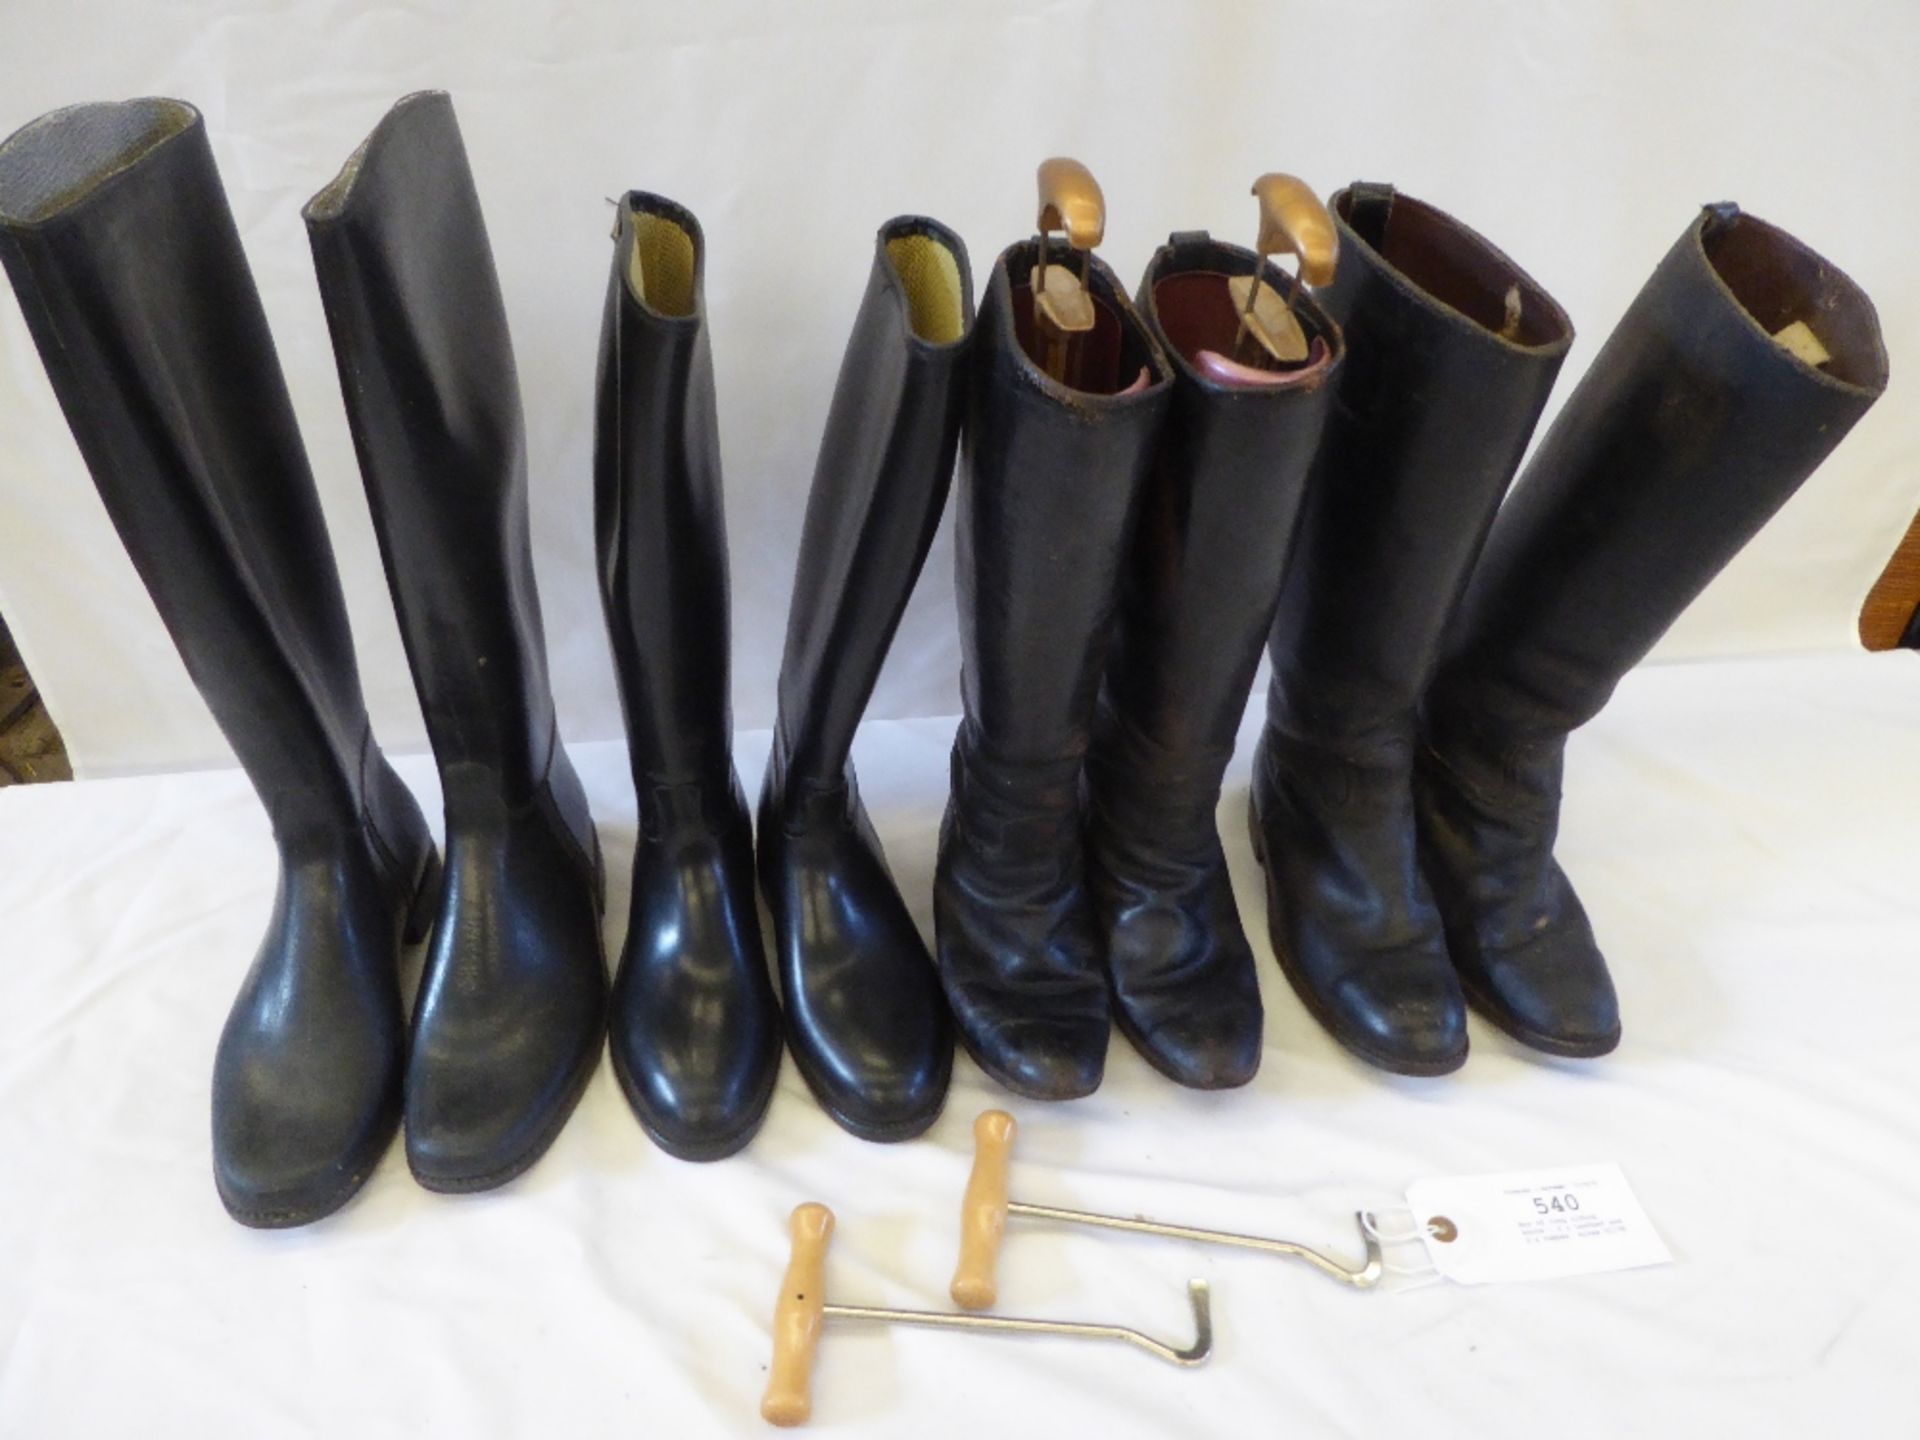 4 prs long riding boots - 2 x leather and 2 x rubber, sizes 37/38, plus a pair of boot pulls